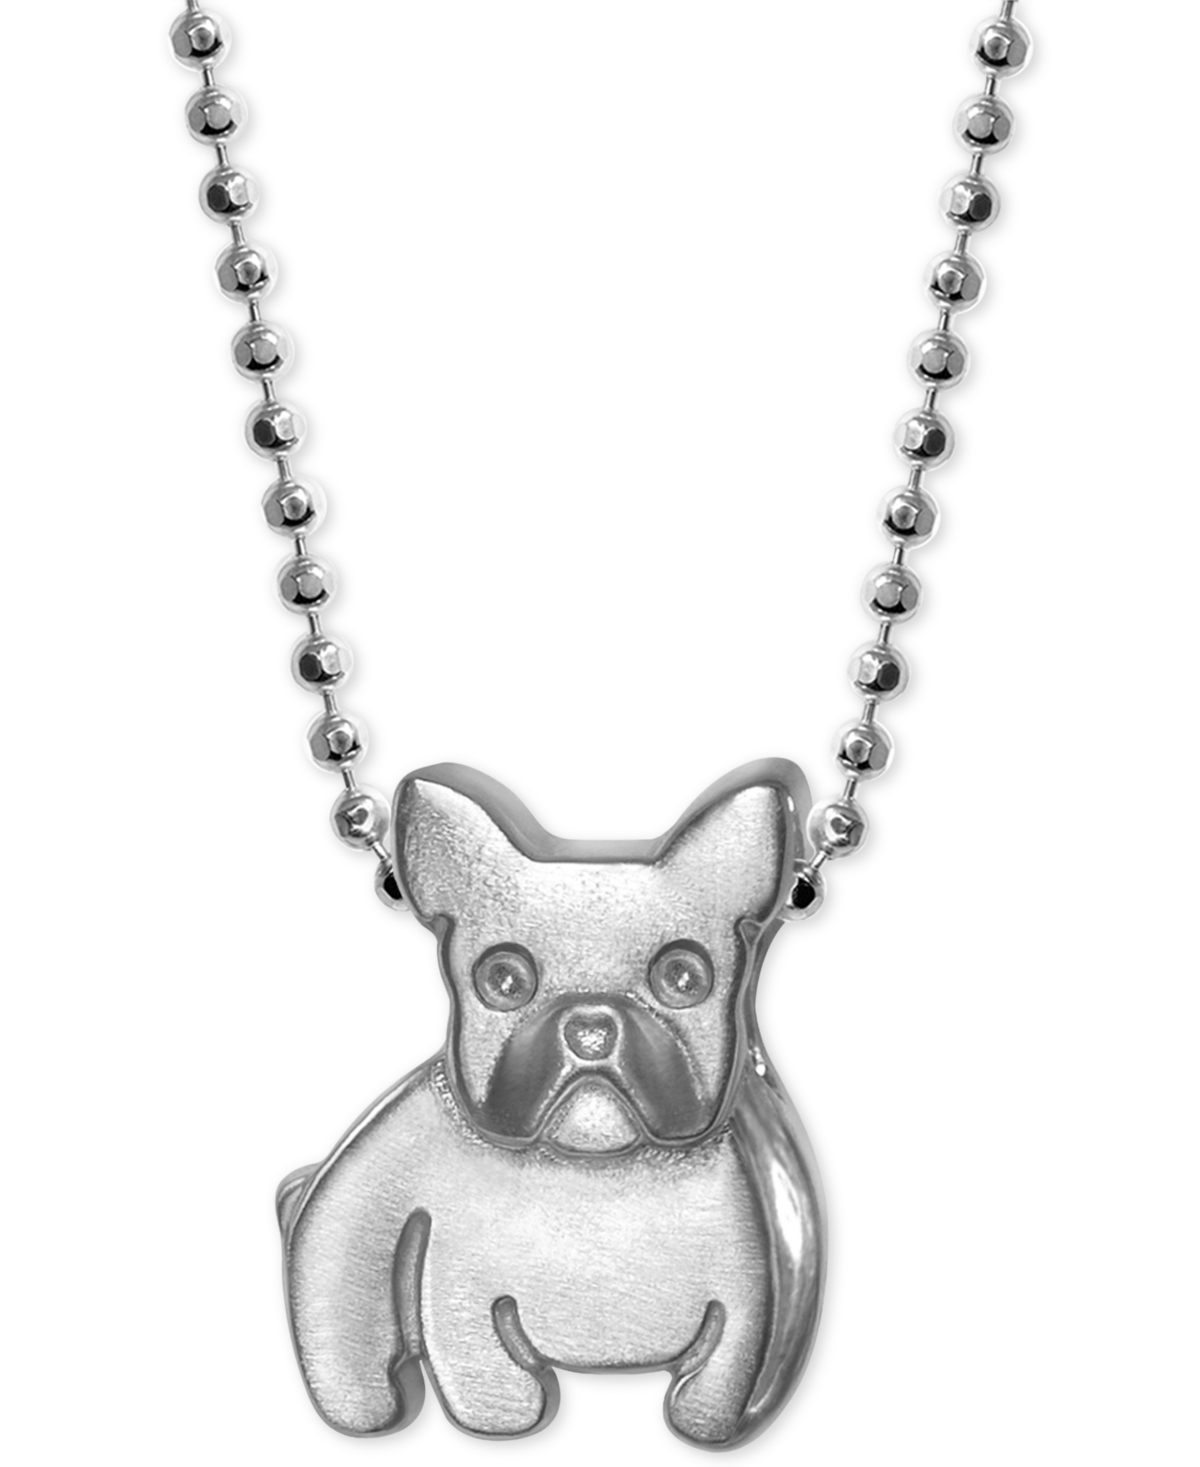 French Bulldog Pendant Necklace in Sterling Silver - Sterling Silver